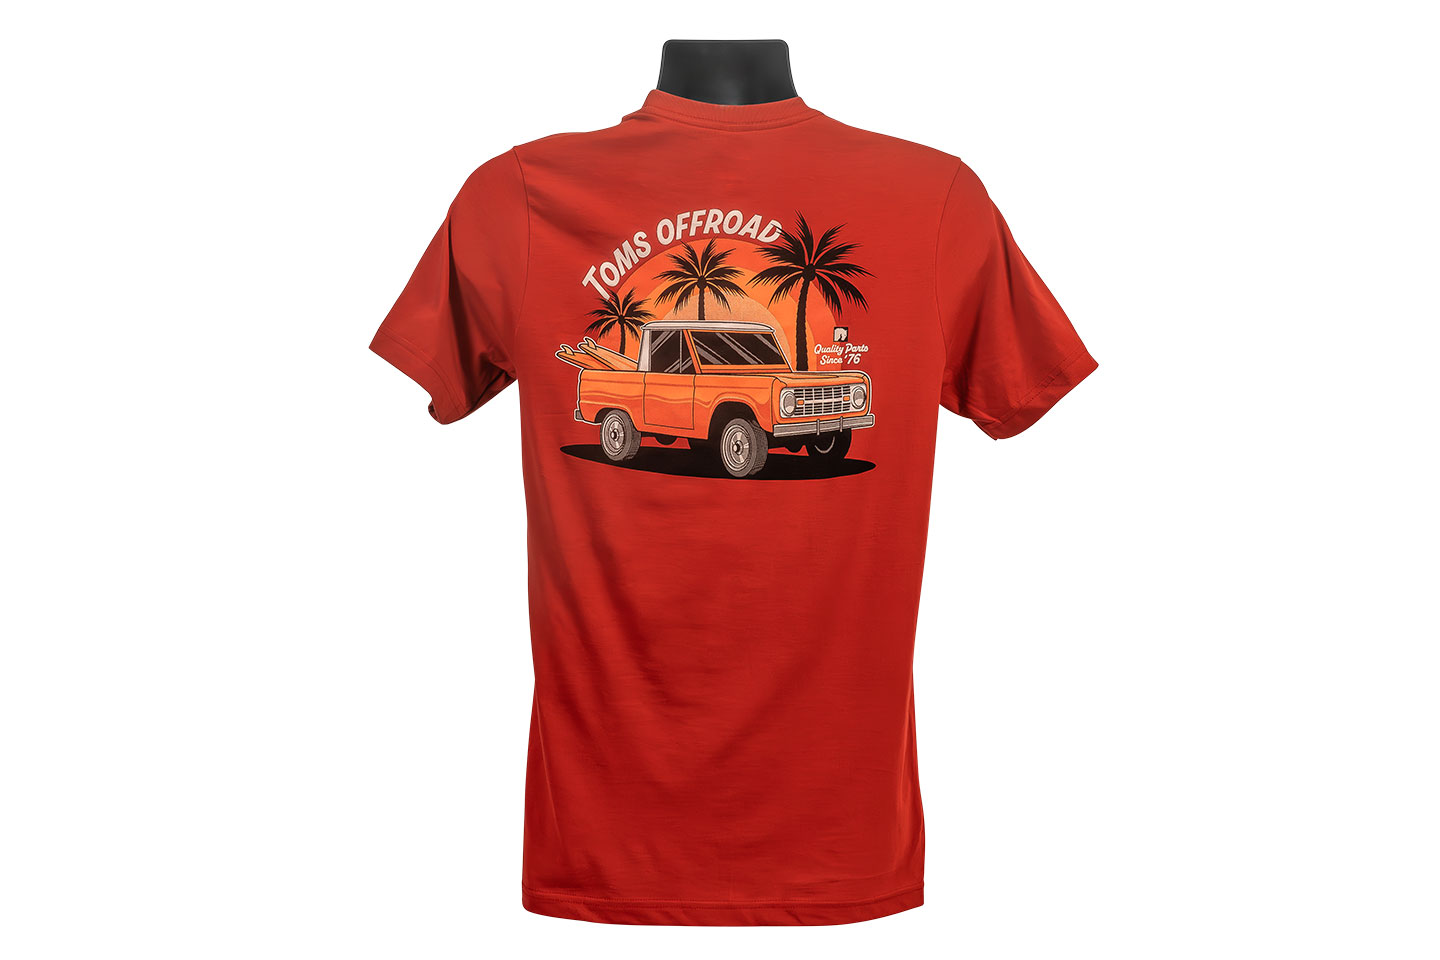 TOMS OFFROAD T-Shirt - Red Beach Cruise